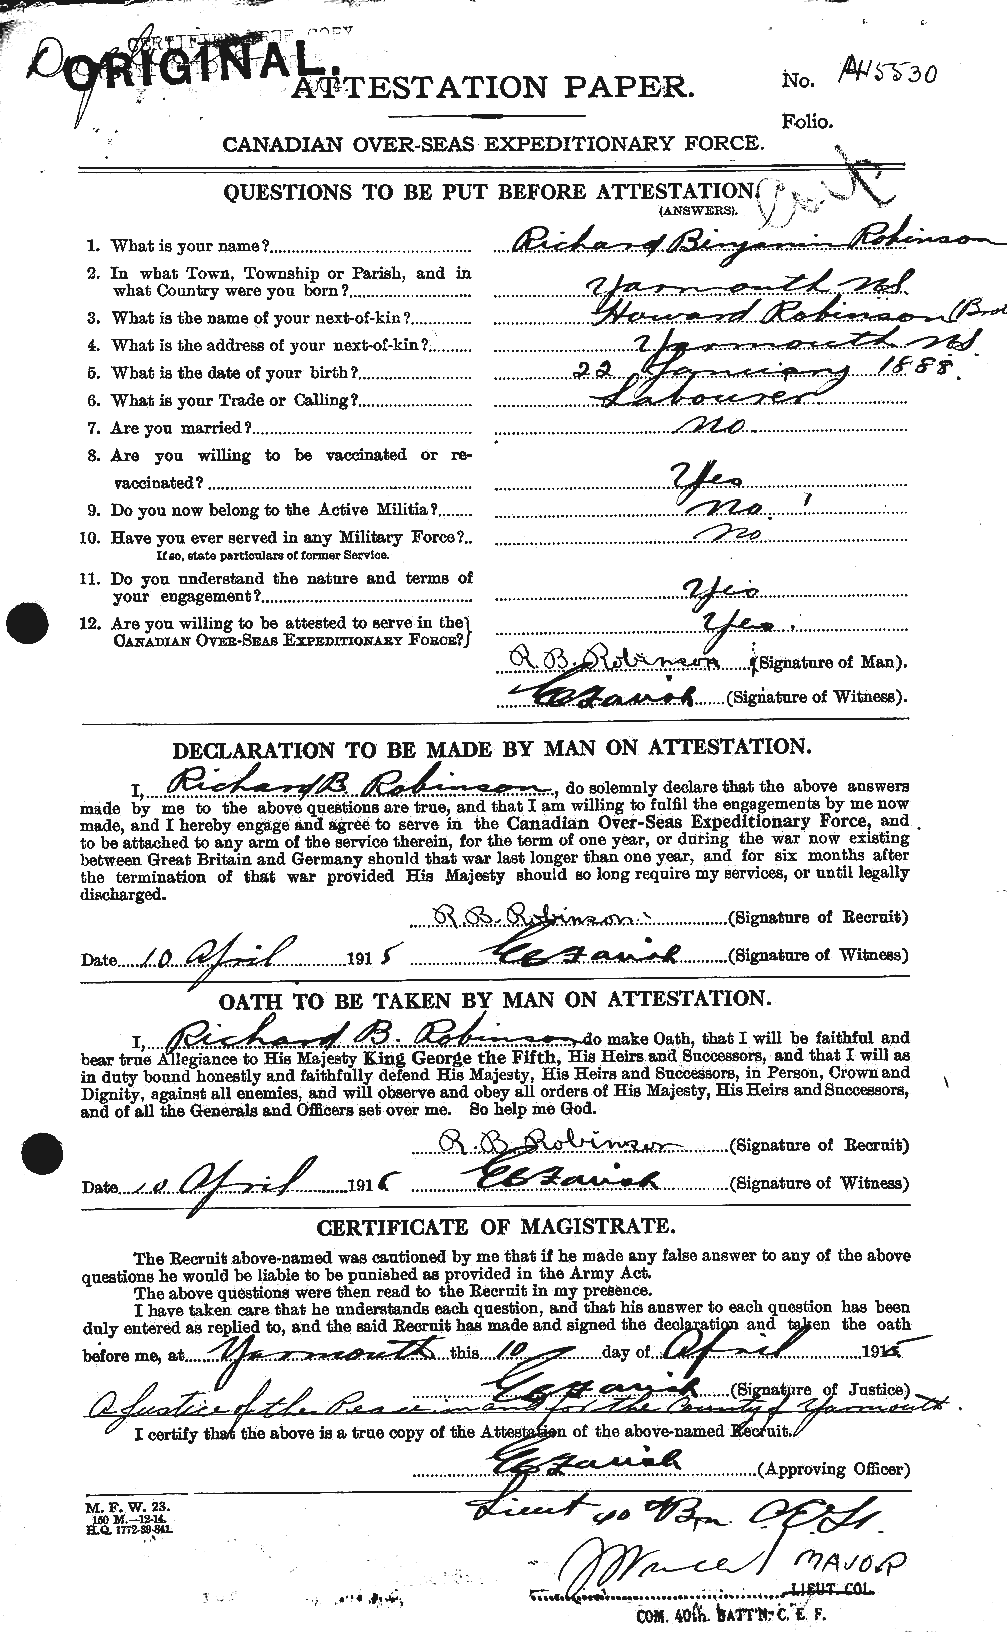 Personnel Records of the First World War - CEF 611755a